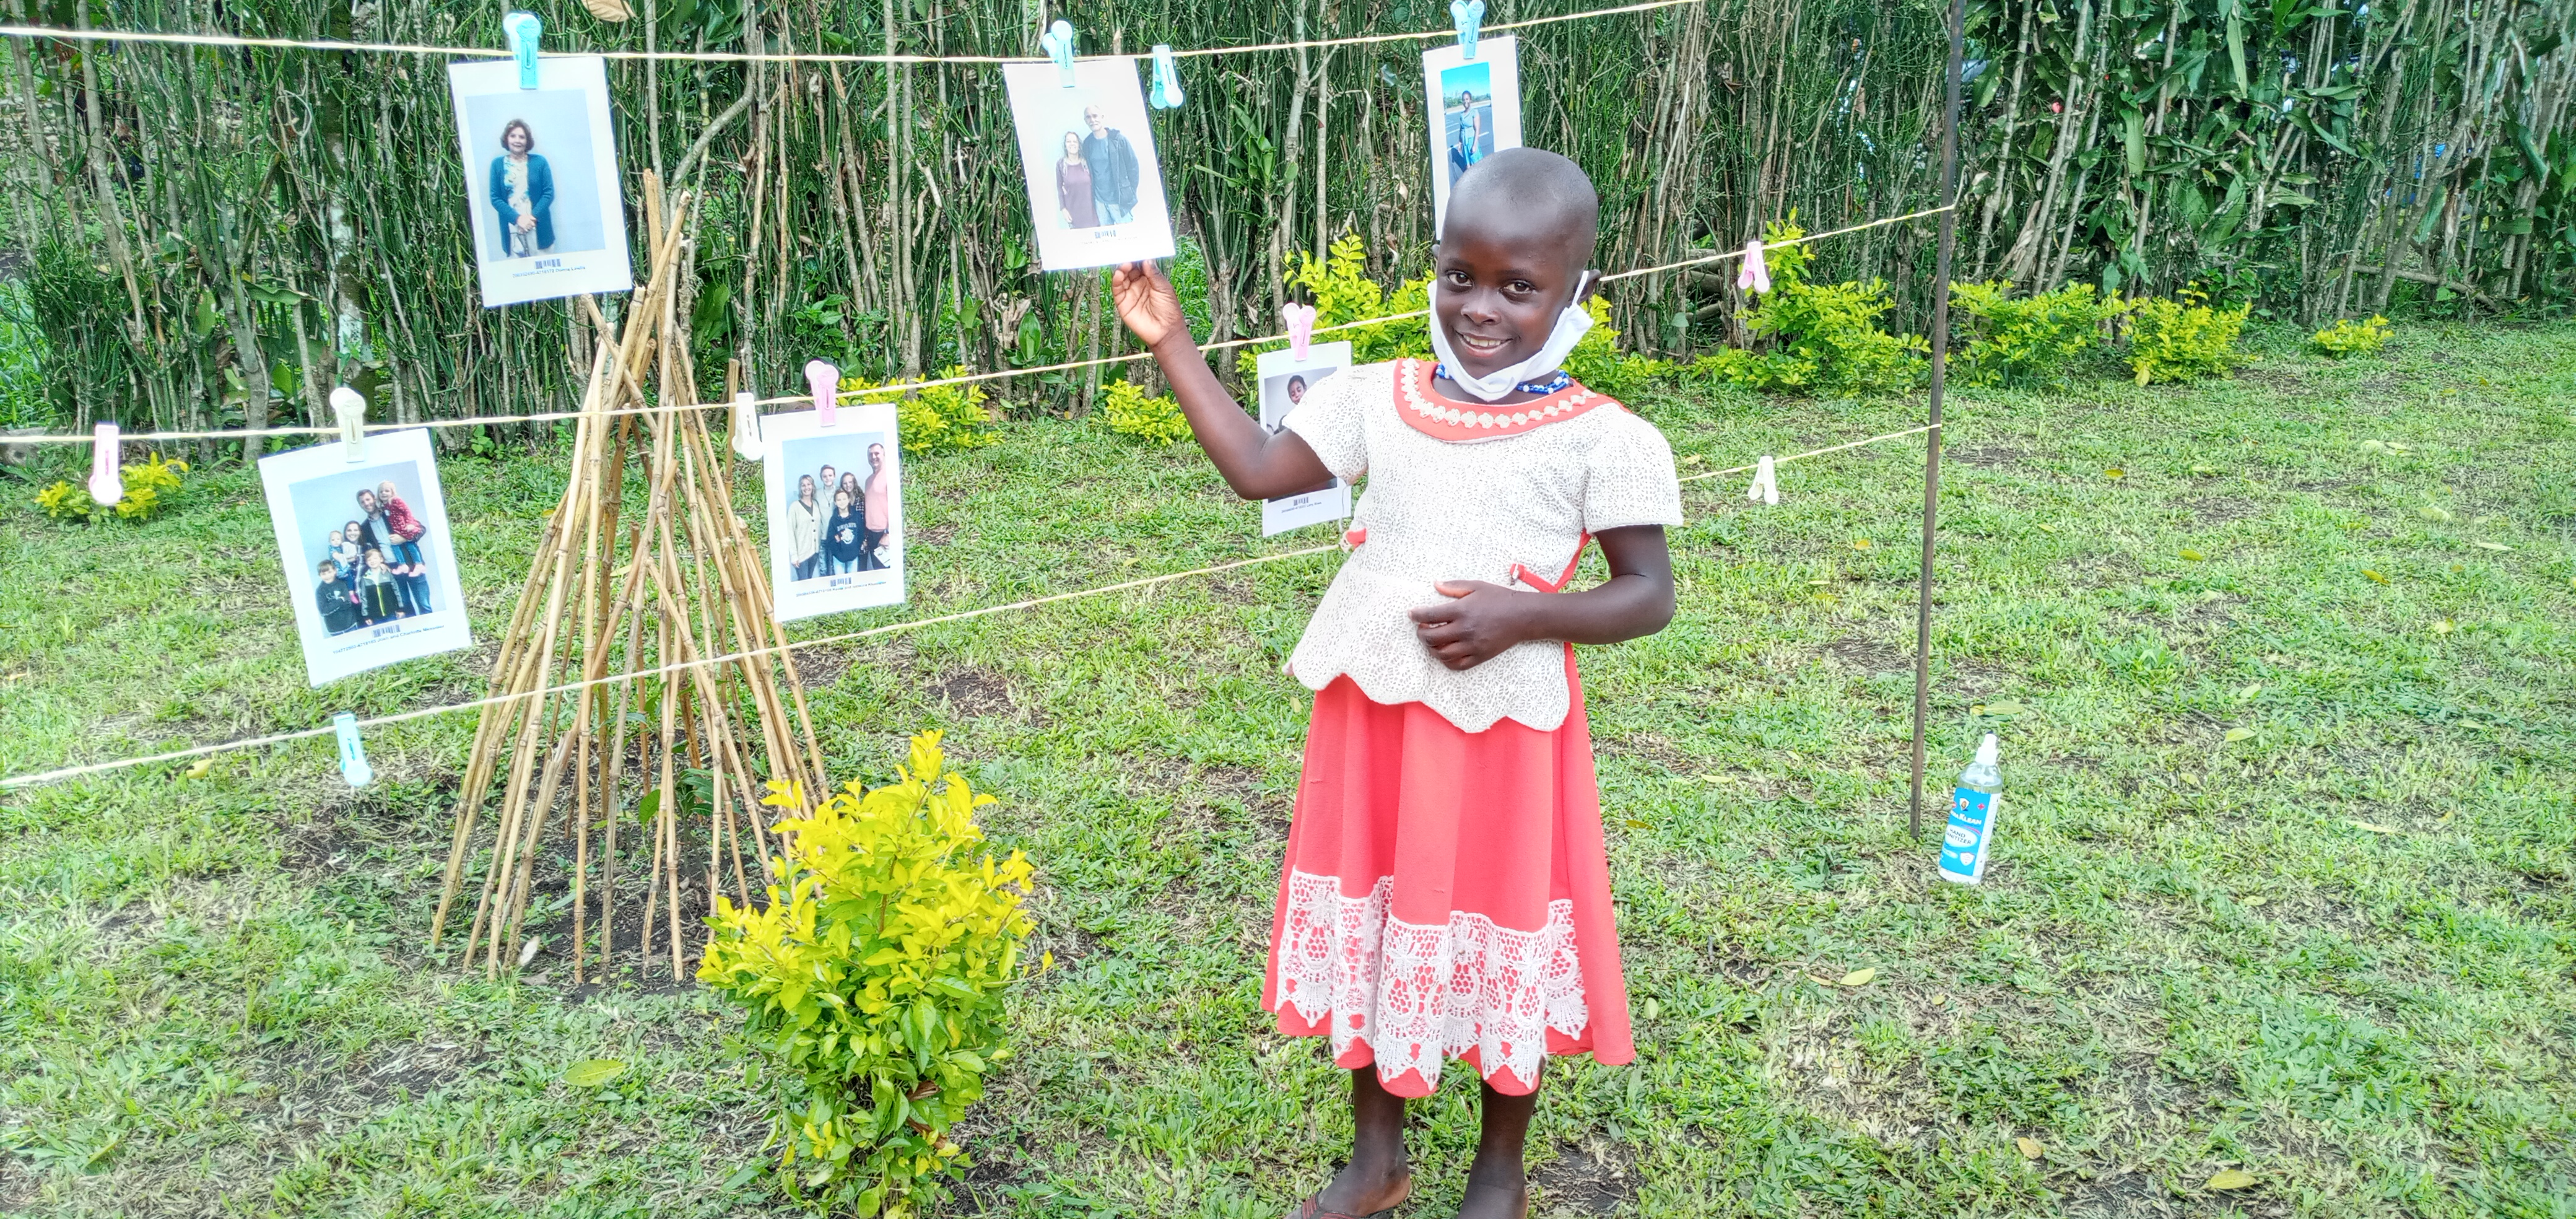 A girl chooses a sponsor during a Chosen event in Uganda. Chosen is a new invitation to child sponsorship where children are enabled to choose their sponsors.  This innovative experience puts the power to choose a sponsor in the hands of the child.